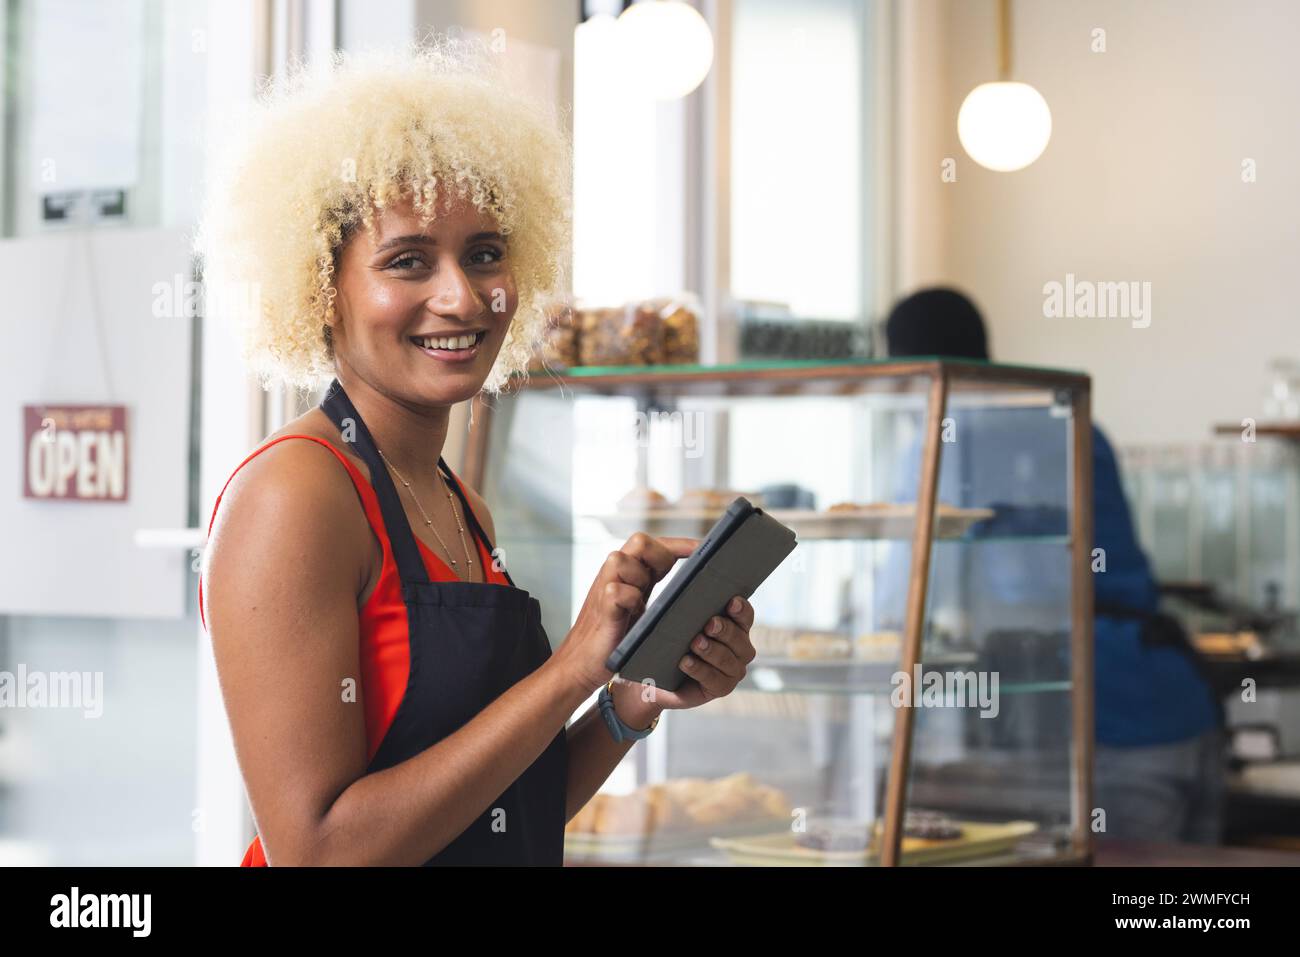 A smiling biracial woman operates a point of sale system in a cafe, with copy space Stock Photo